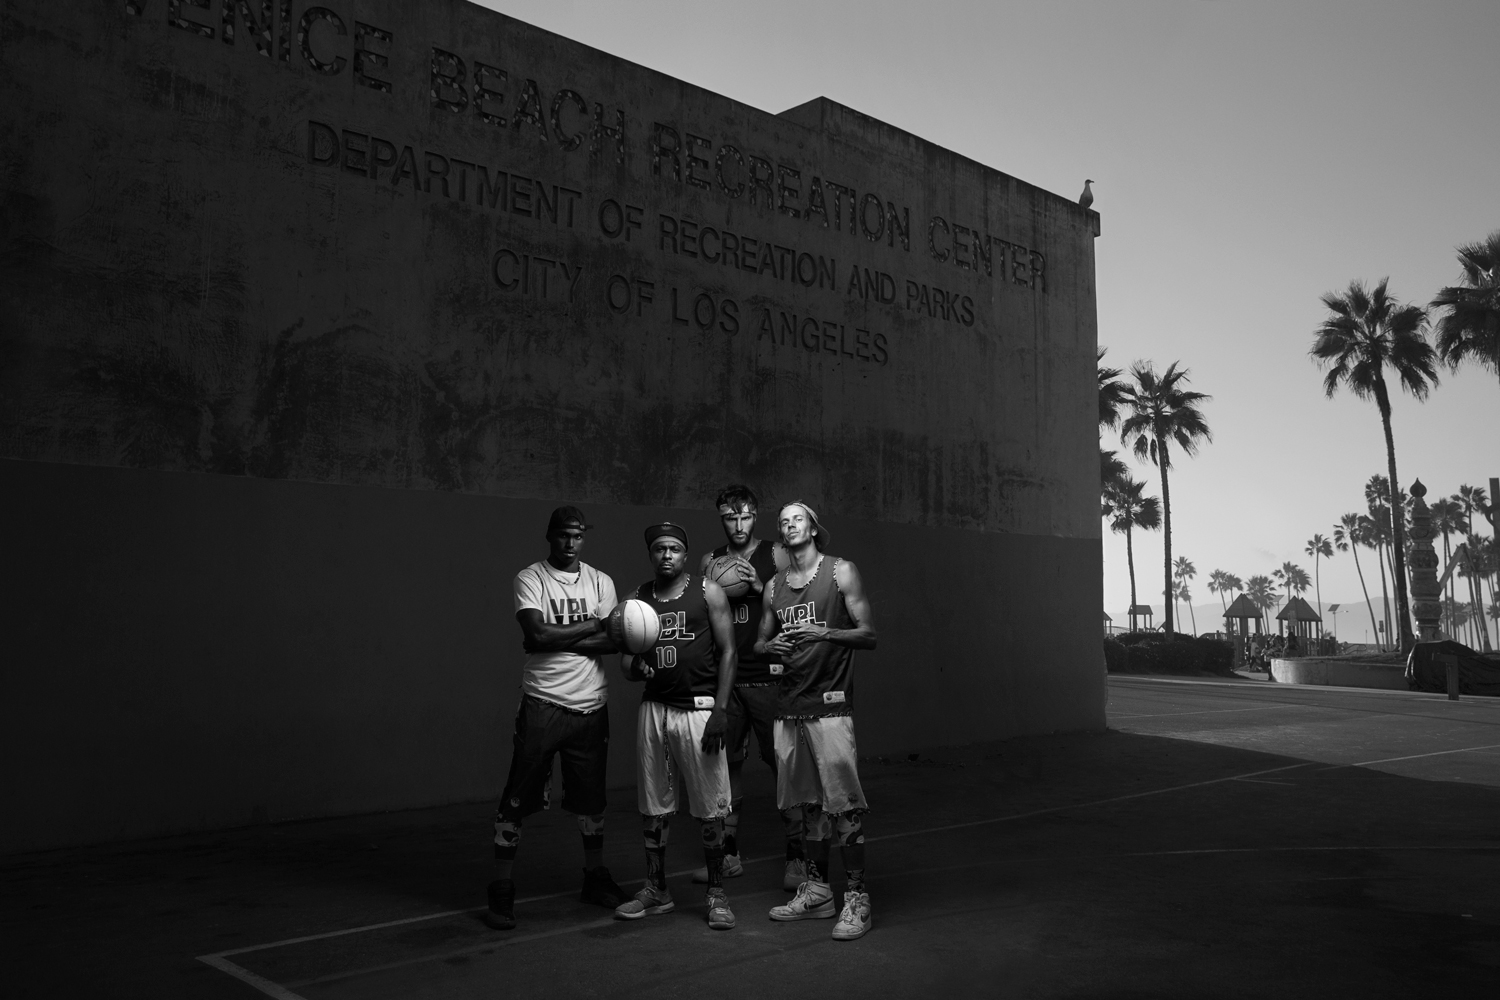 A group picture of young basketball players on a venice beach basketball court with palm trees in the background